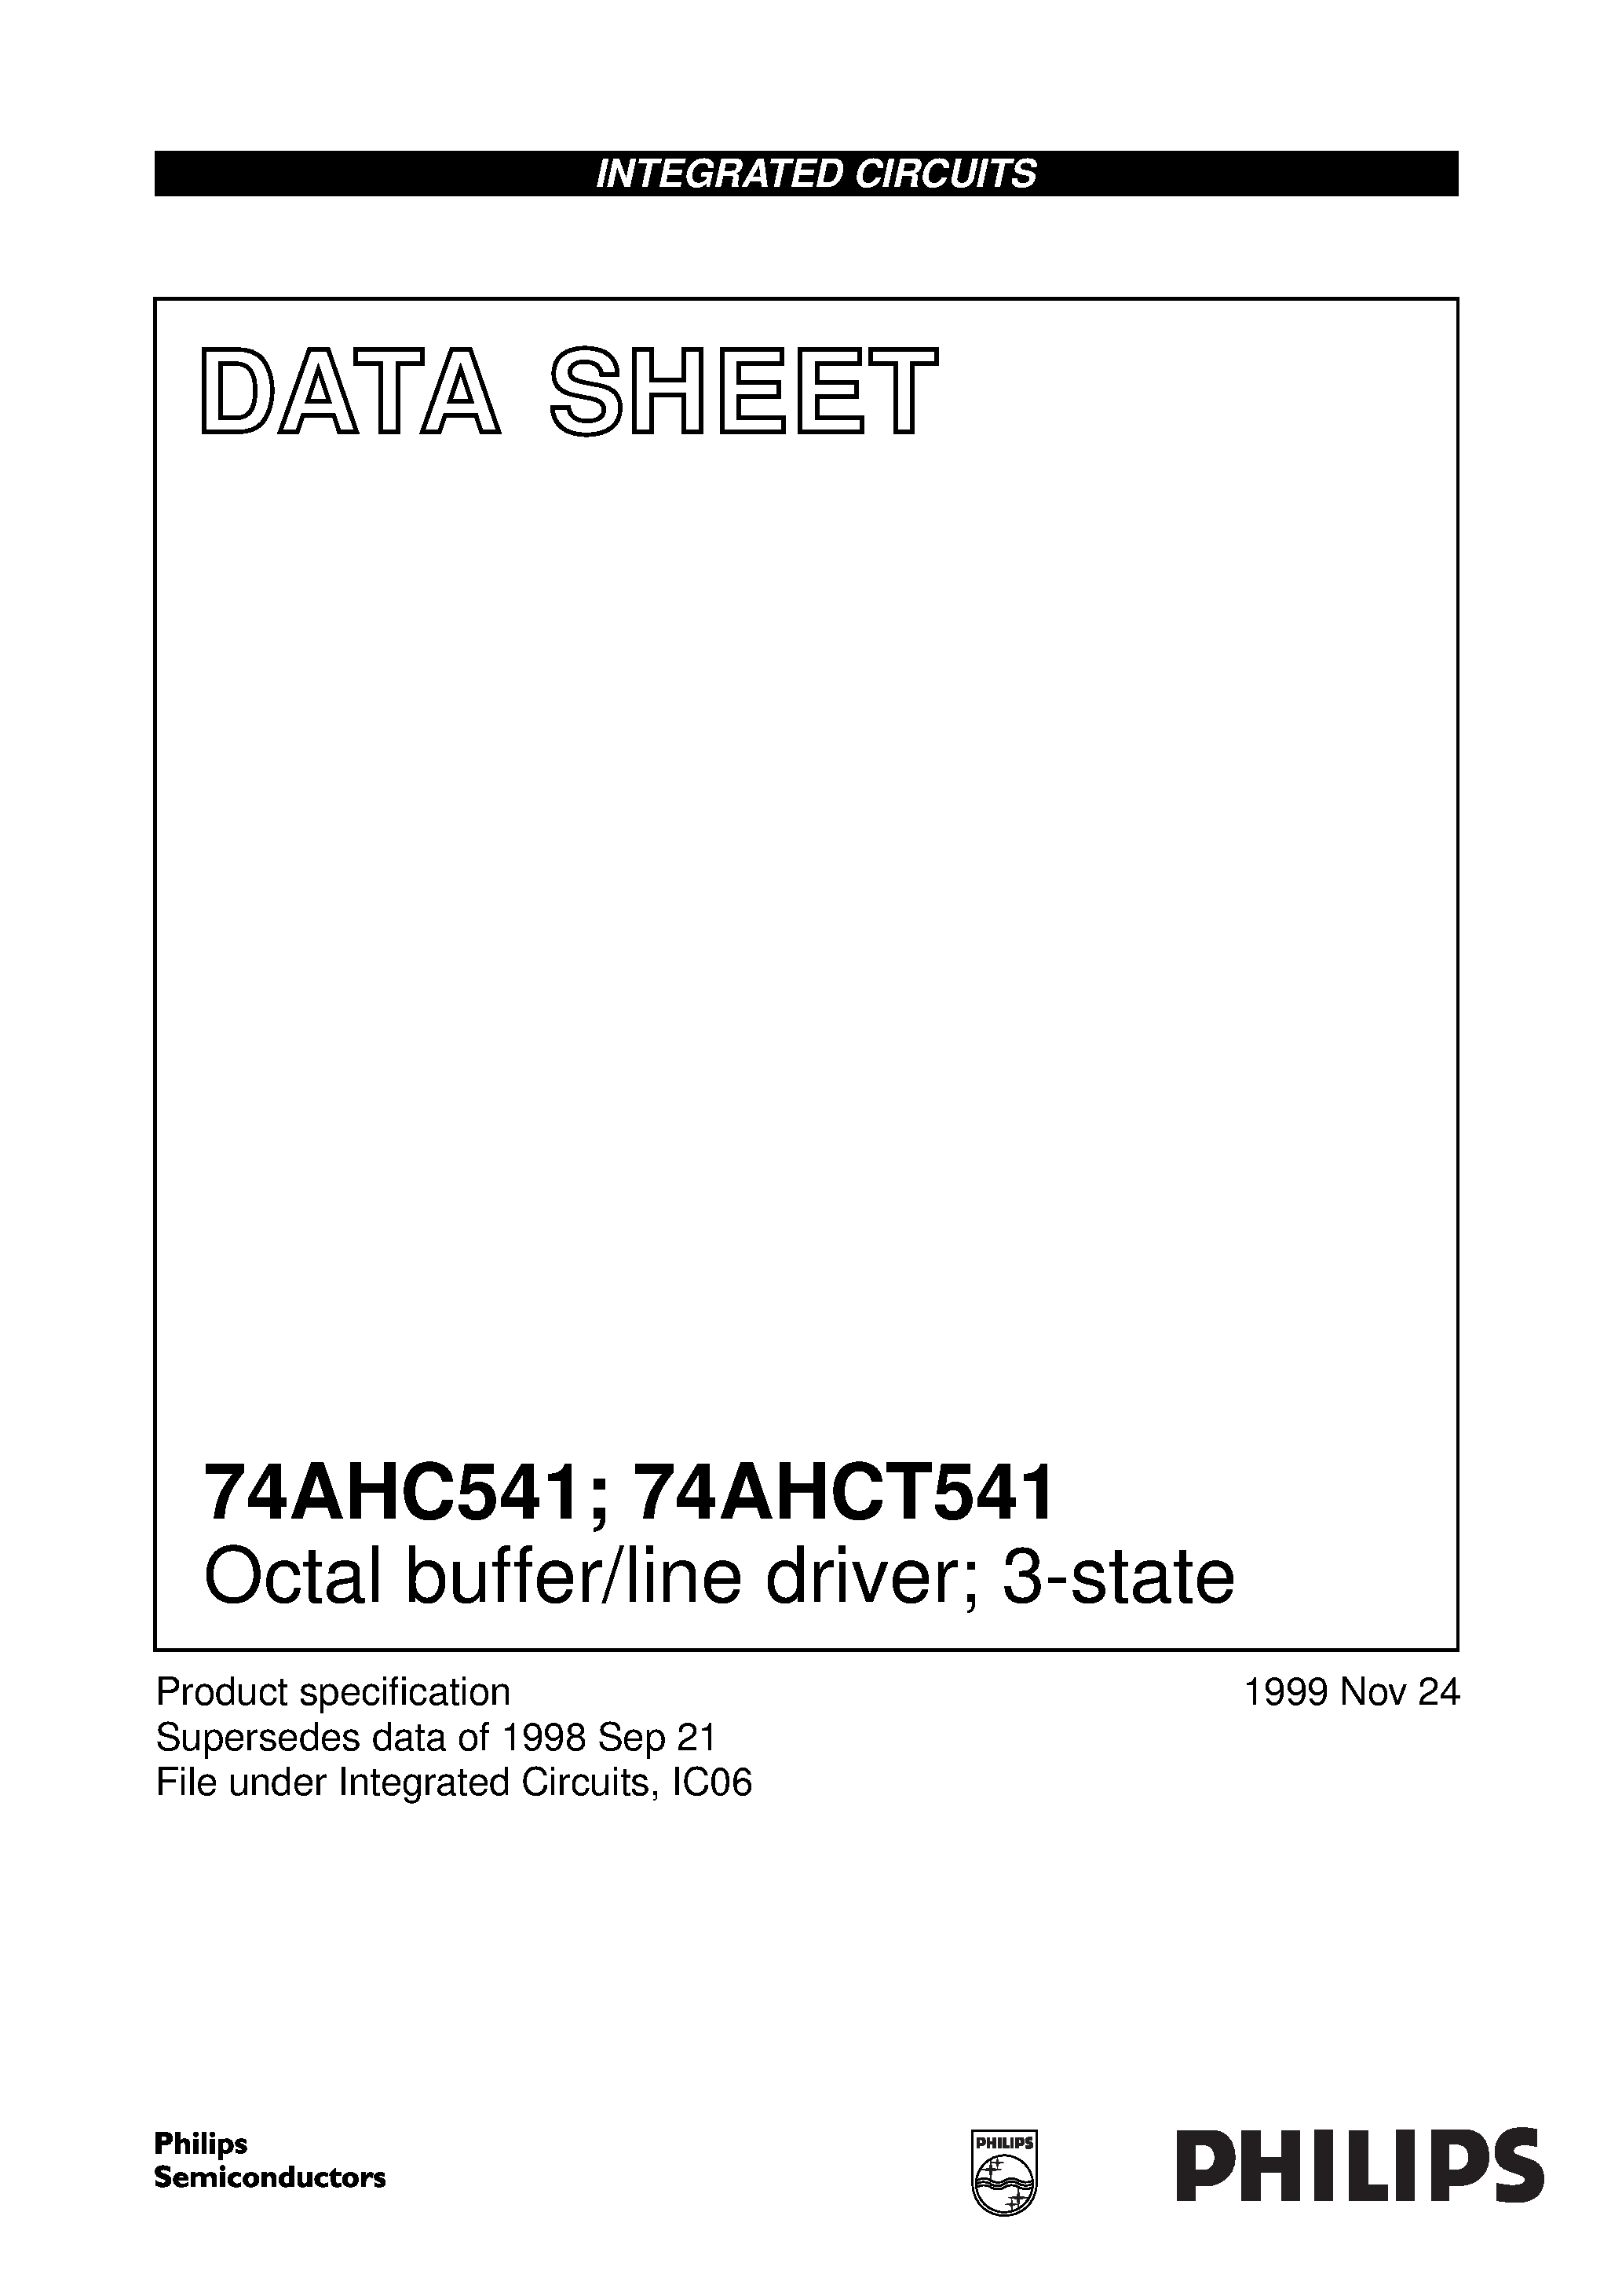 Datasheet 74AHCT541 - Octal buffer/line driver; 3-state page 1